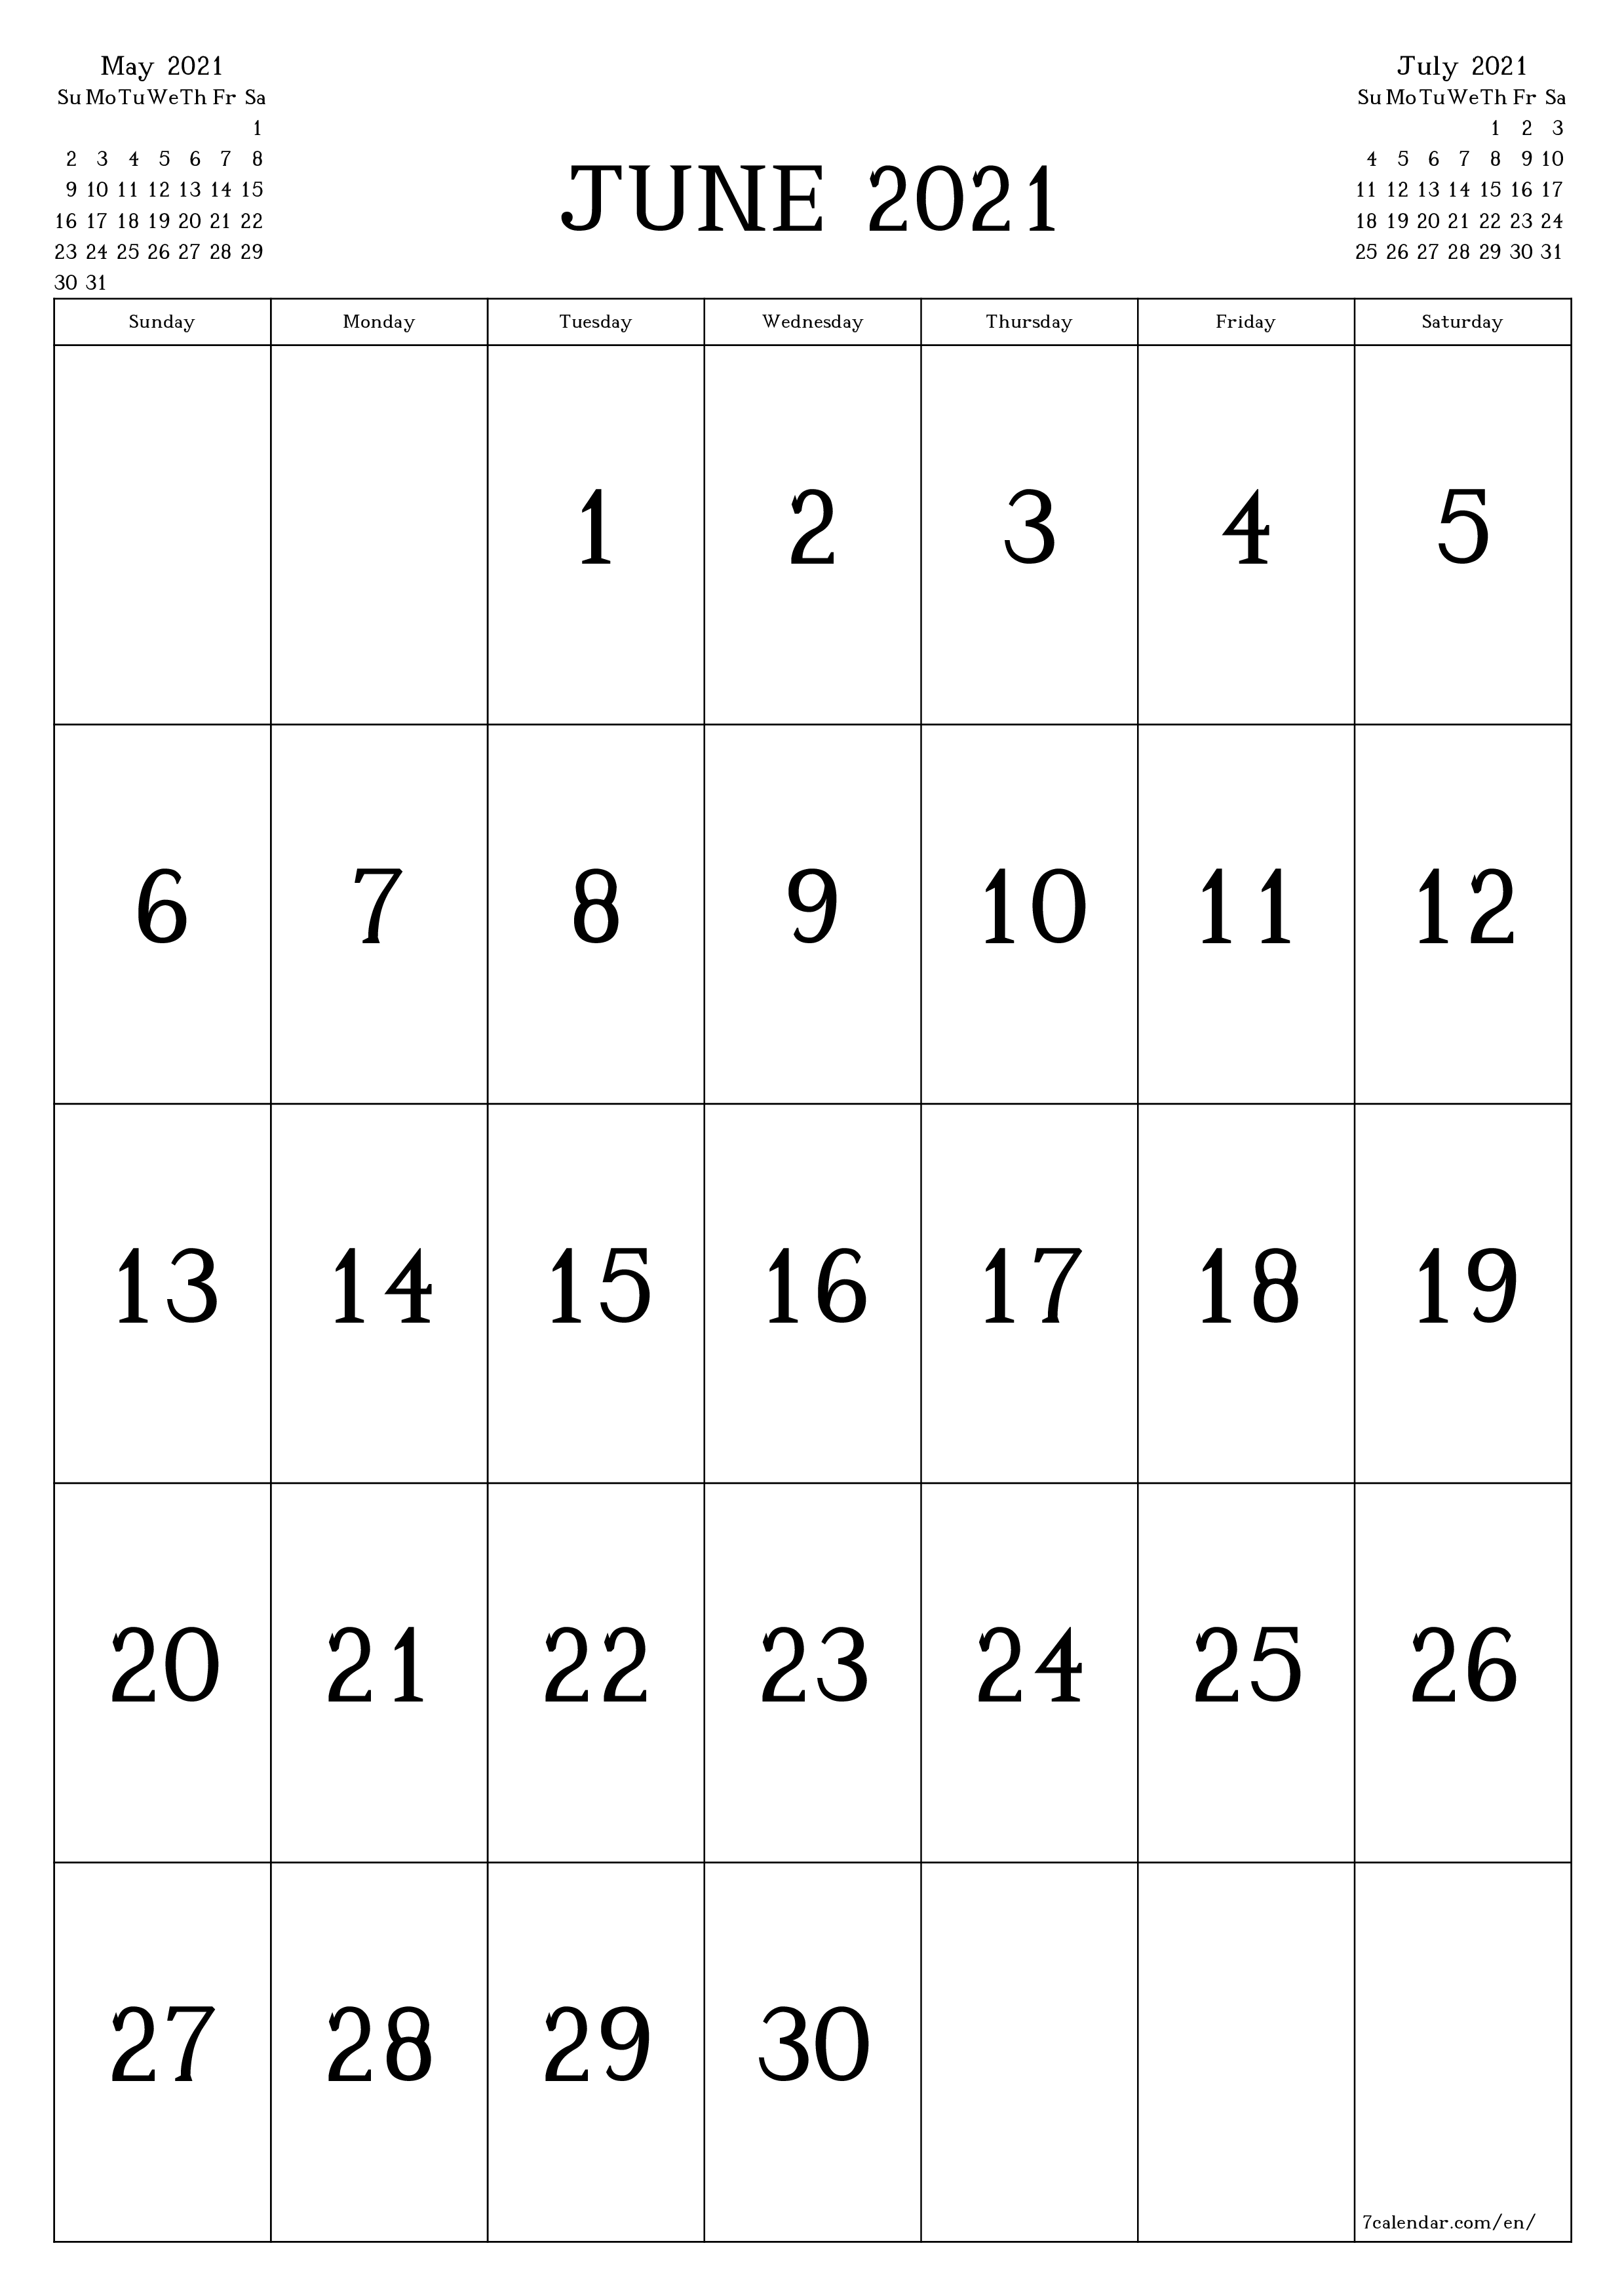 Blank monthly dated HD template image of calendar for month June 2021 save and print to PDF PNG English - 7calendar.com